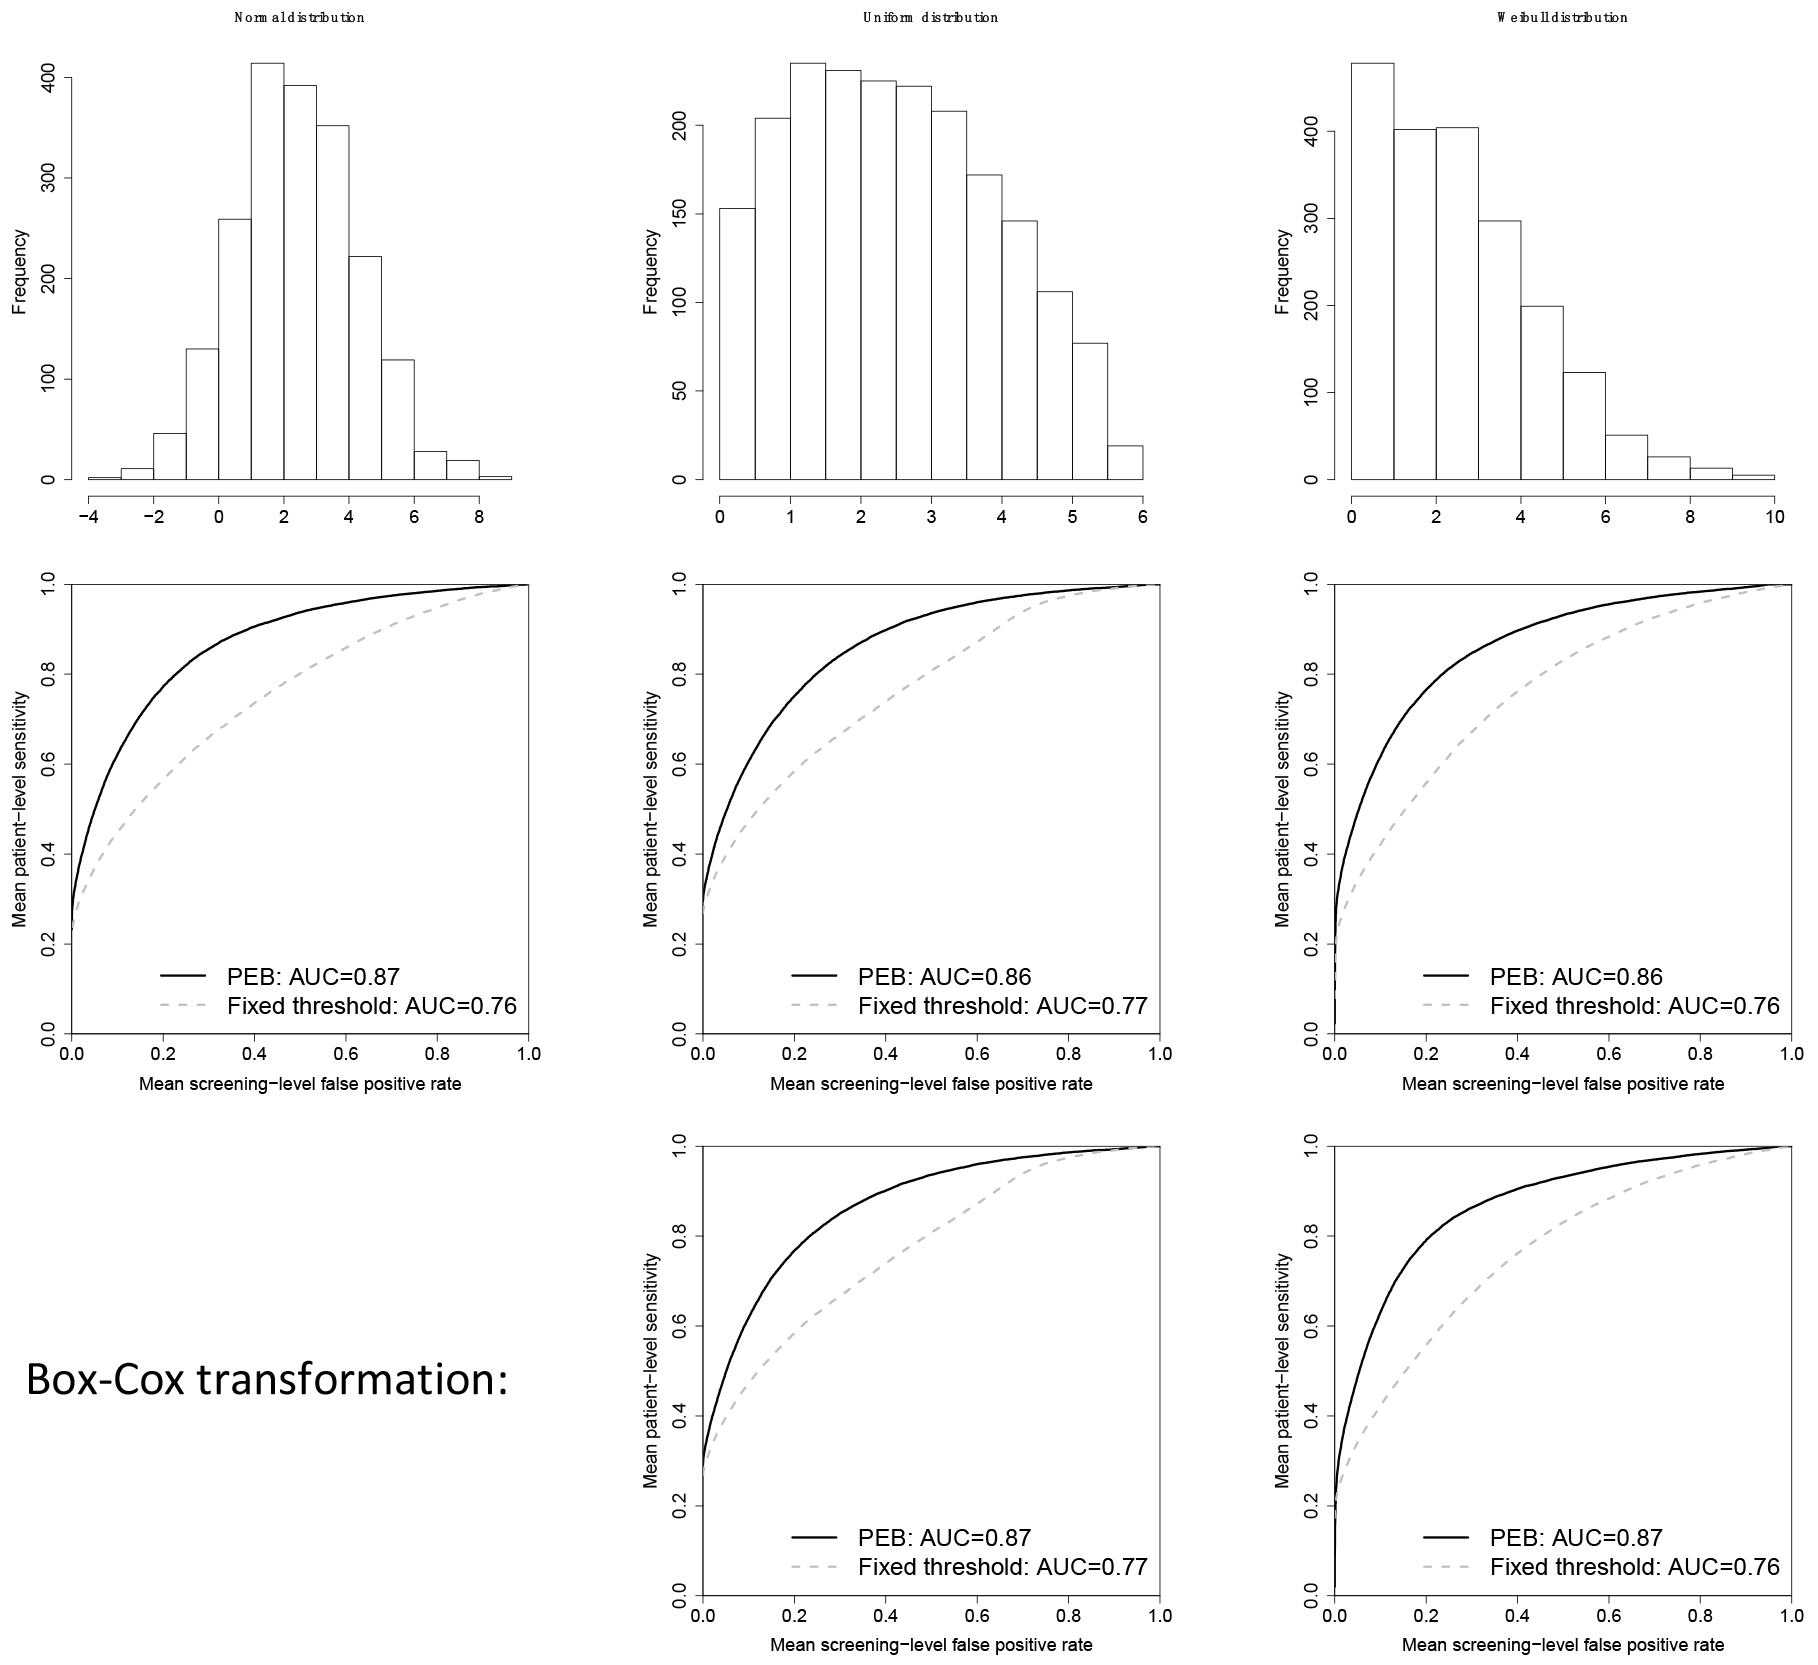 Distribution of the biomarker in patients that remain cancer-free in the cohort (top row); mean receiver operating curves (ROC) for the parametric empirical Bayes algorithm (PEB), applied to the biomarker without any transformation, and a fixed threshold decision rule (middle row); ROC curve for the PEB algorithm after a Box-Cox transformation of the biomarker and a fixed threshold decision rule (bottom row). AUC: area under the ROC curve.